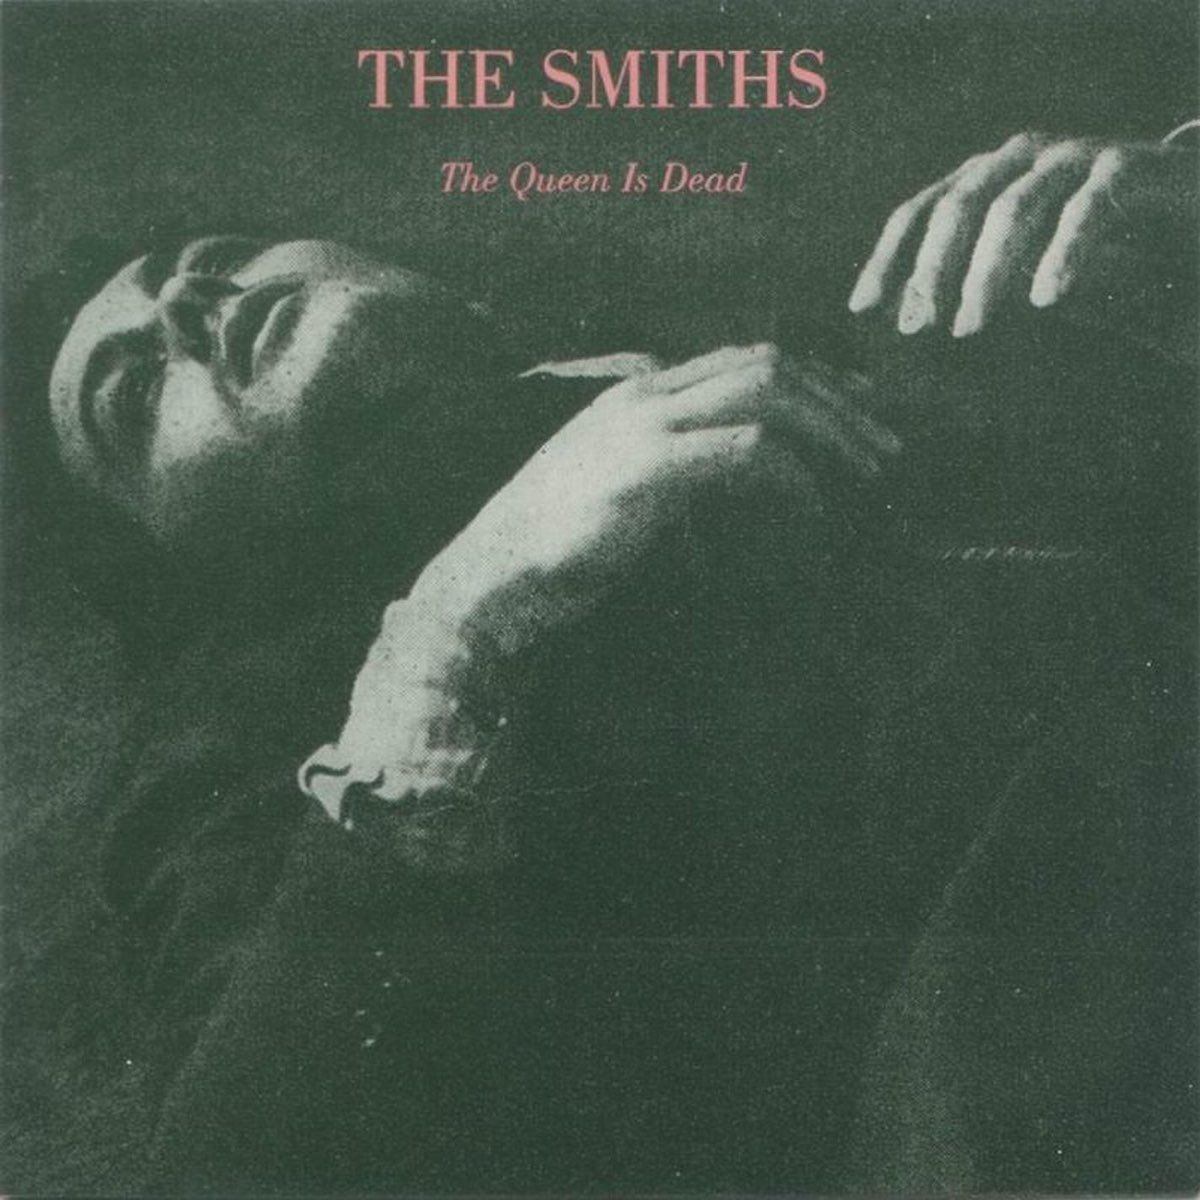 The Smiths — Frankly, Mr. Shankly cover artwork